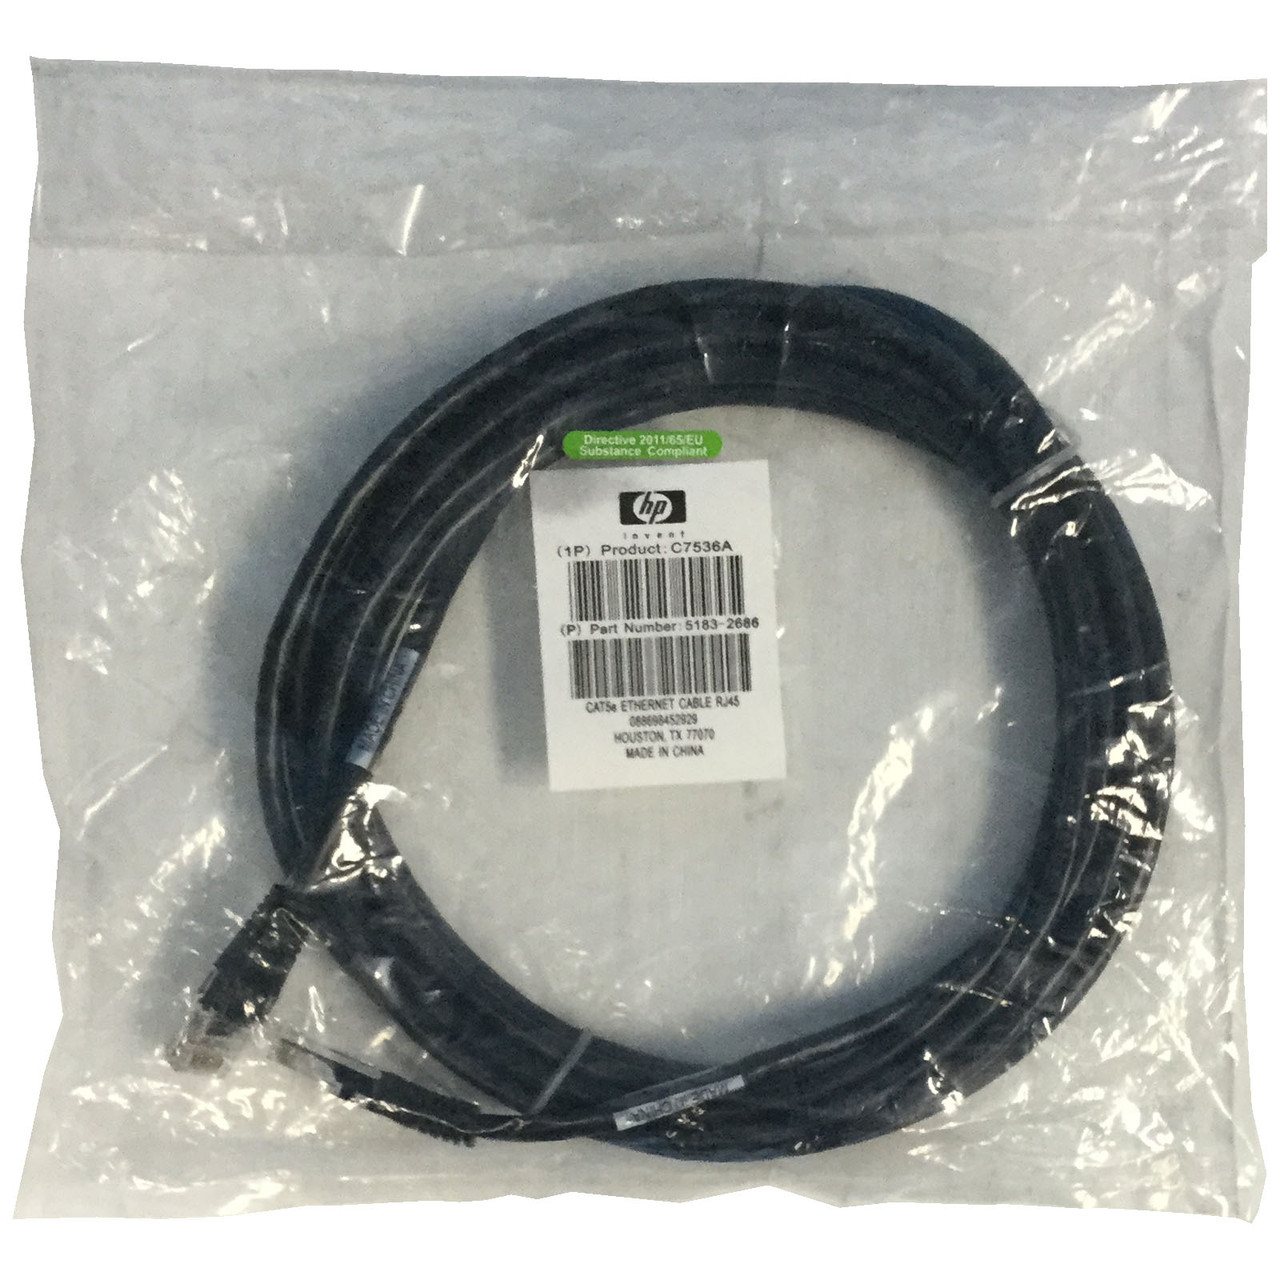 HPe C7536A 4.2M Cat5e RJ45 Cable - new bagged 5183-2686